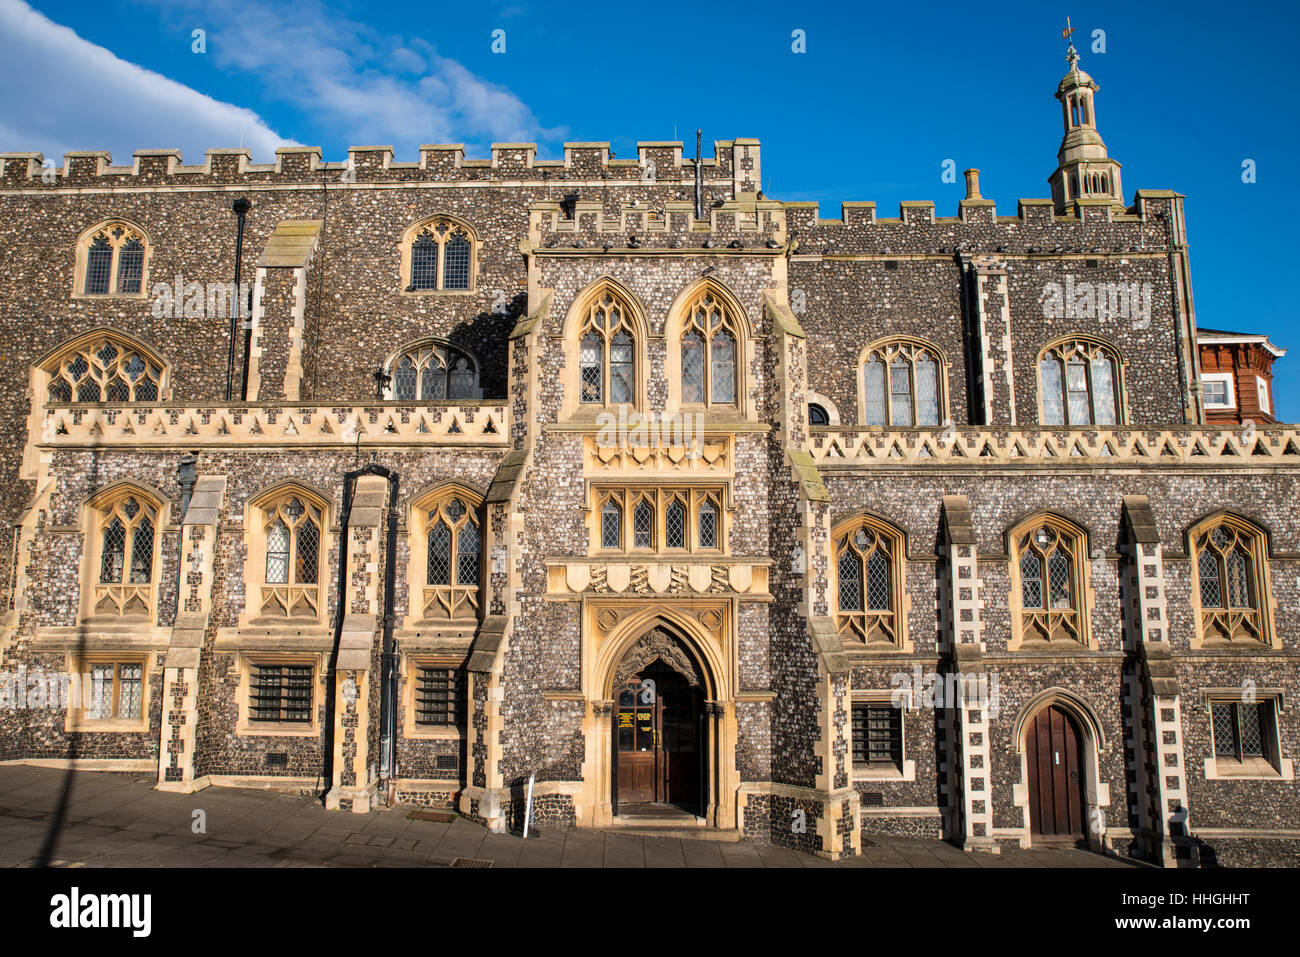 The impressive facade of Norwich Guildhall located on Gaol Hill in the historic city of Norwich, UK. Stock Photo